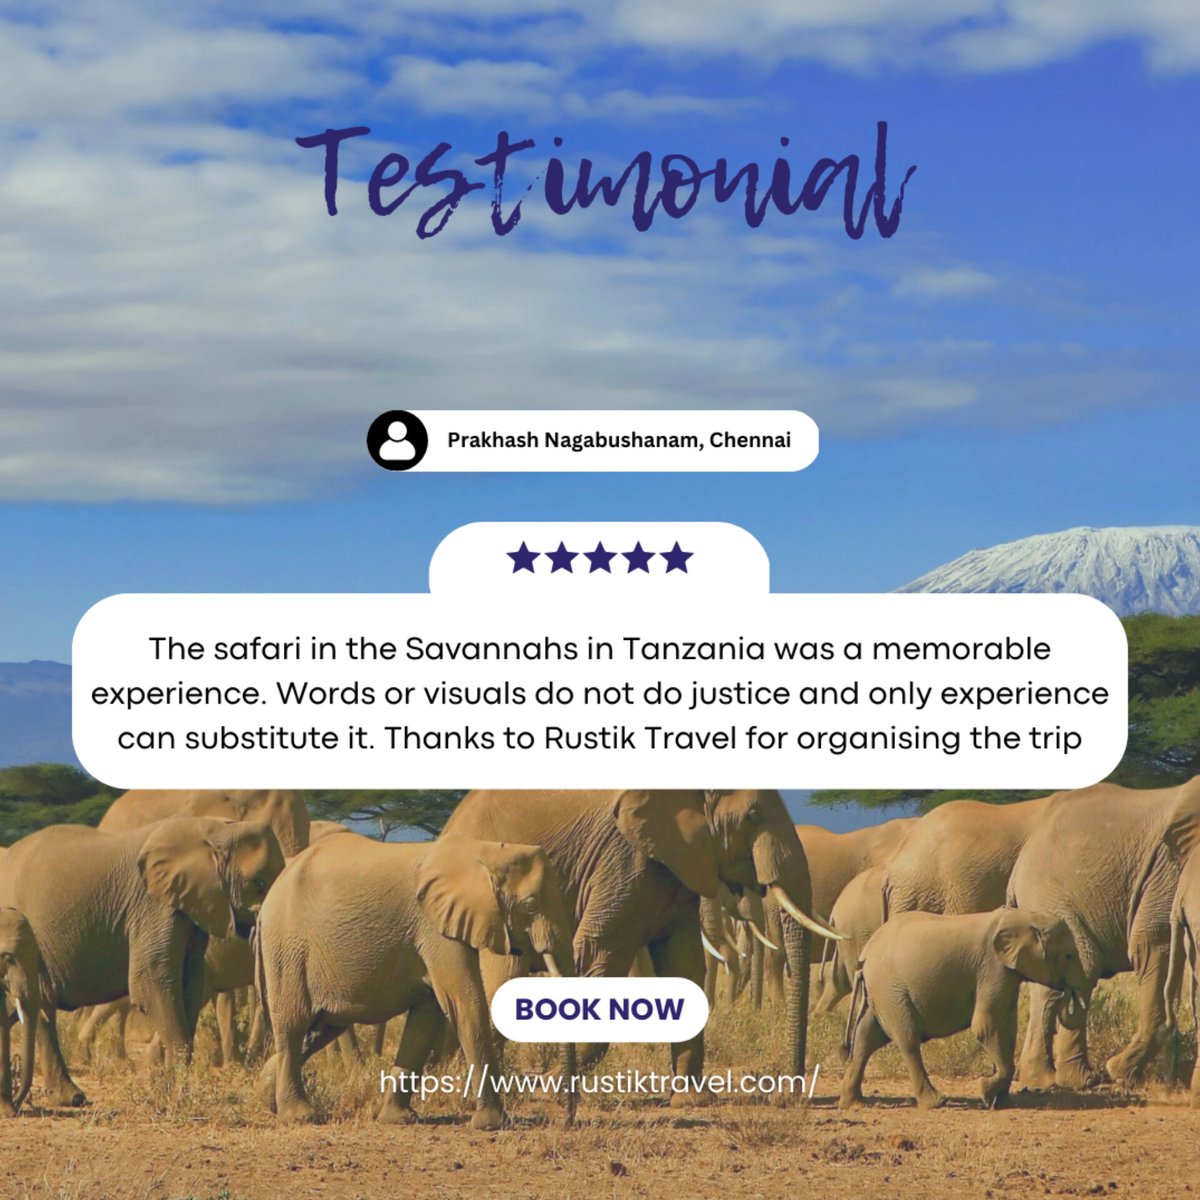 Thank you so much Mr. Prakhash🙏😊 Book your holiday with us!! Dm to get itinerary options or to get your trip customised. #testimonial #tanzania #safari #rustiktravel #experiencelife